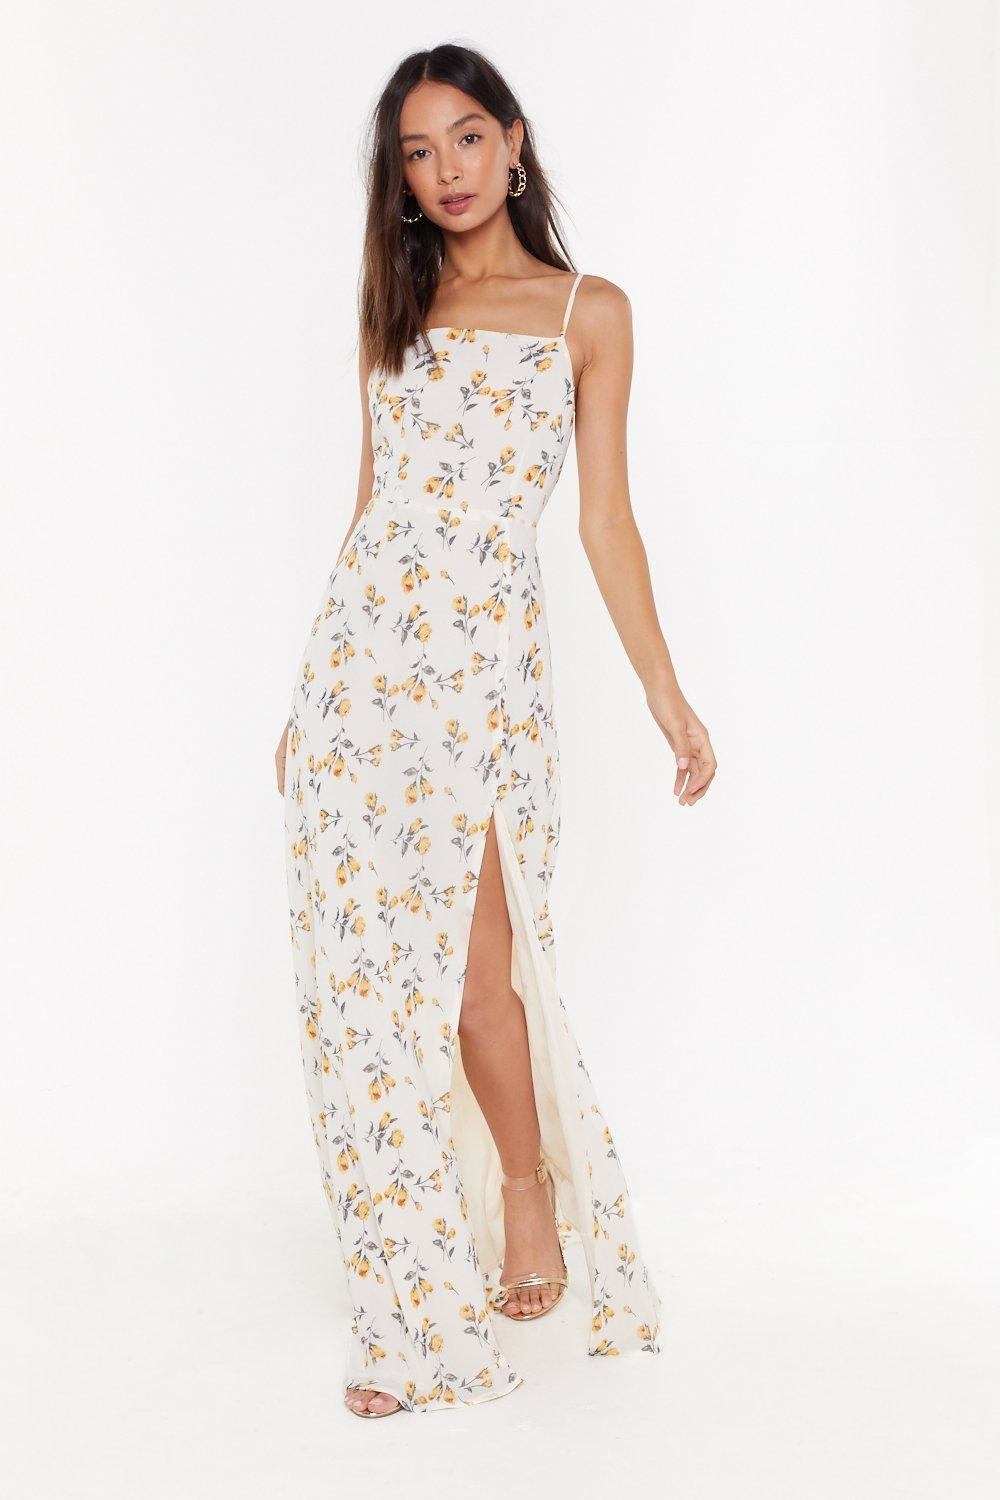 A person wearing a maxi floral dress with a box neck and slit up one leg 